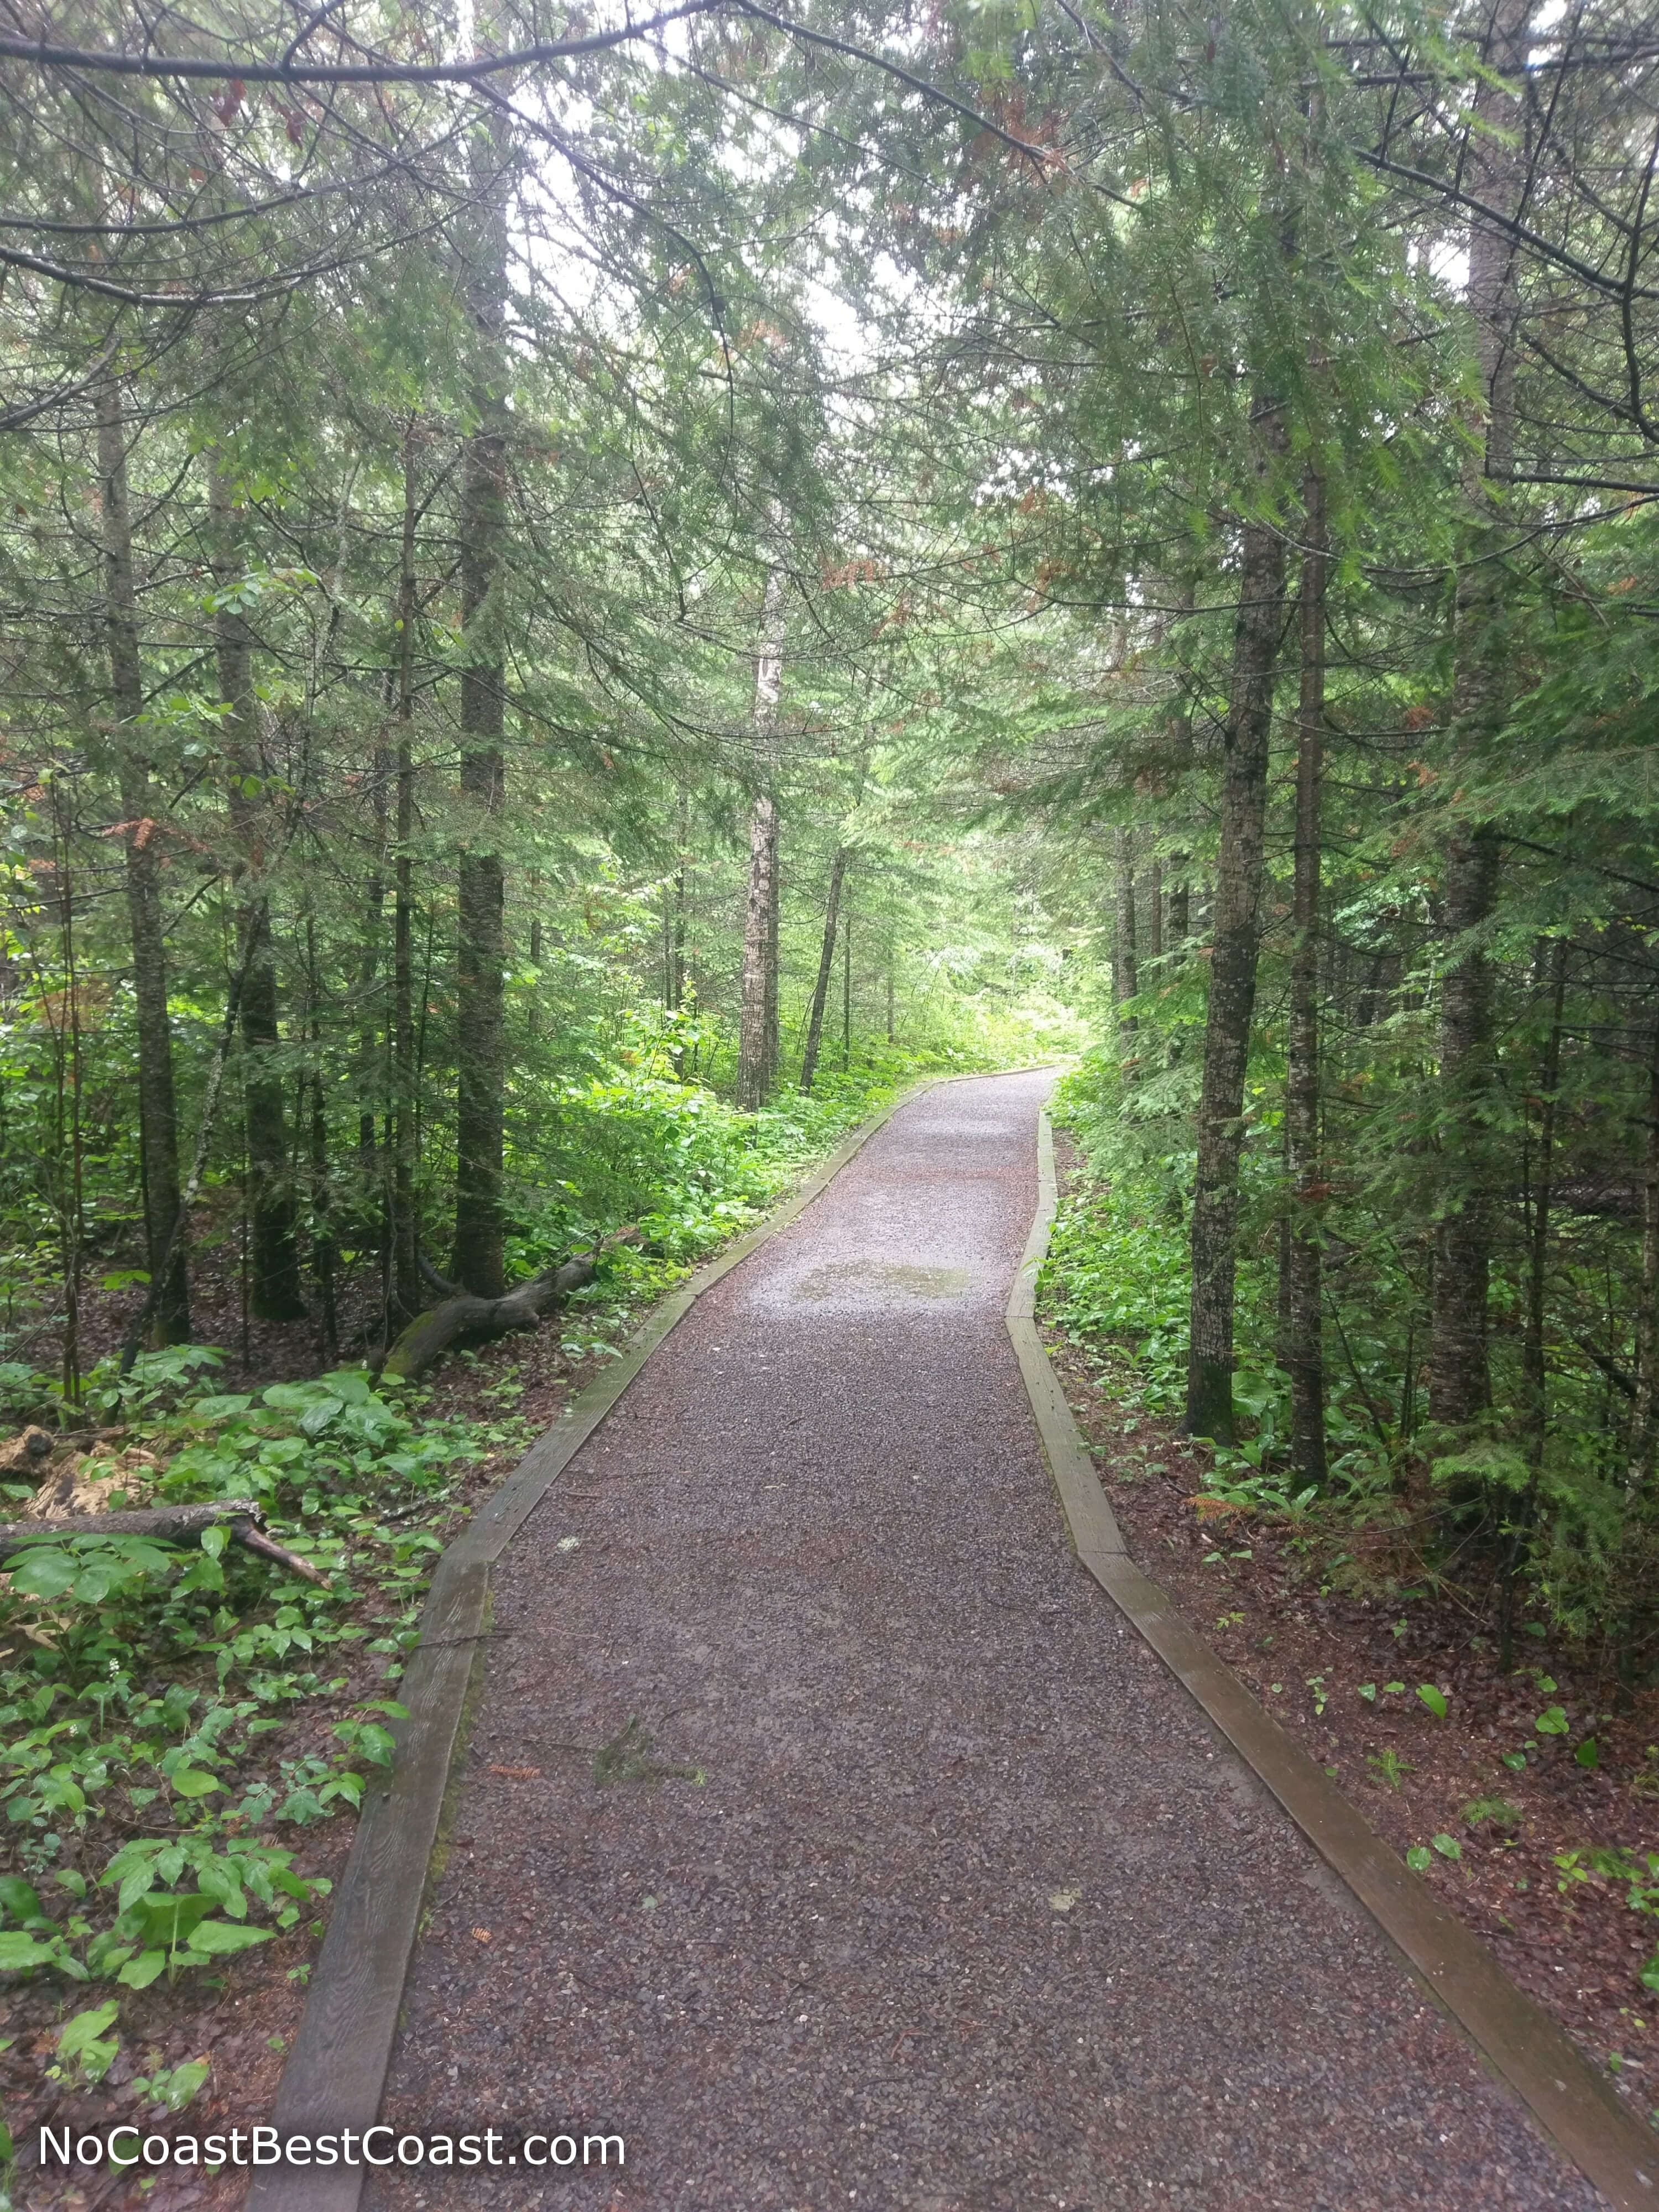 The Mountain Portage Trail cutting through the pine forest